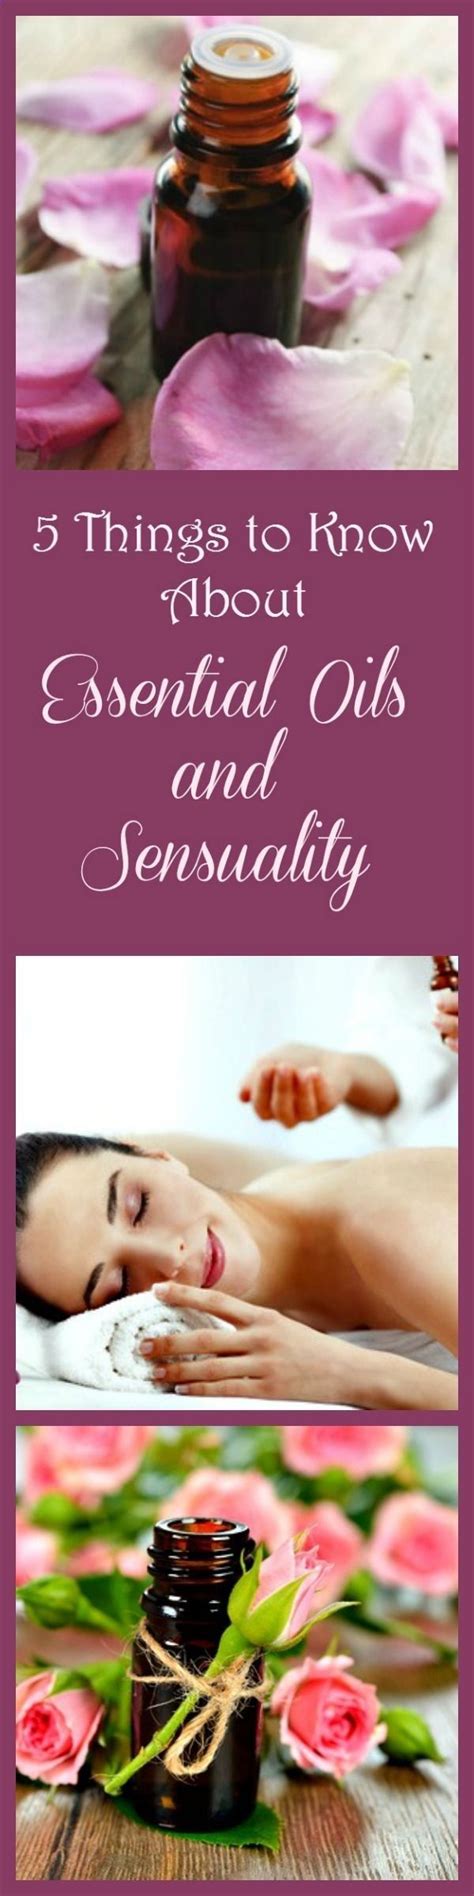 essential oils for love and romance oils and natural scents have been used to increase libido